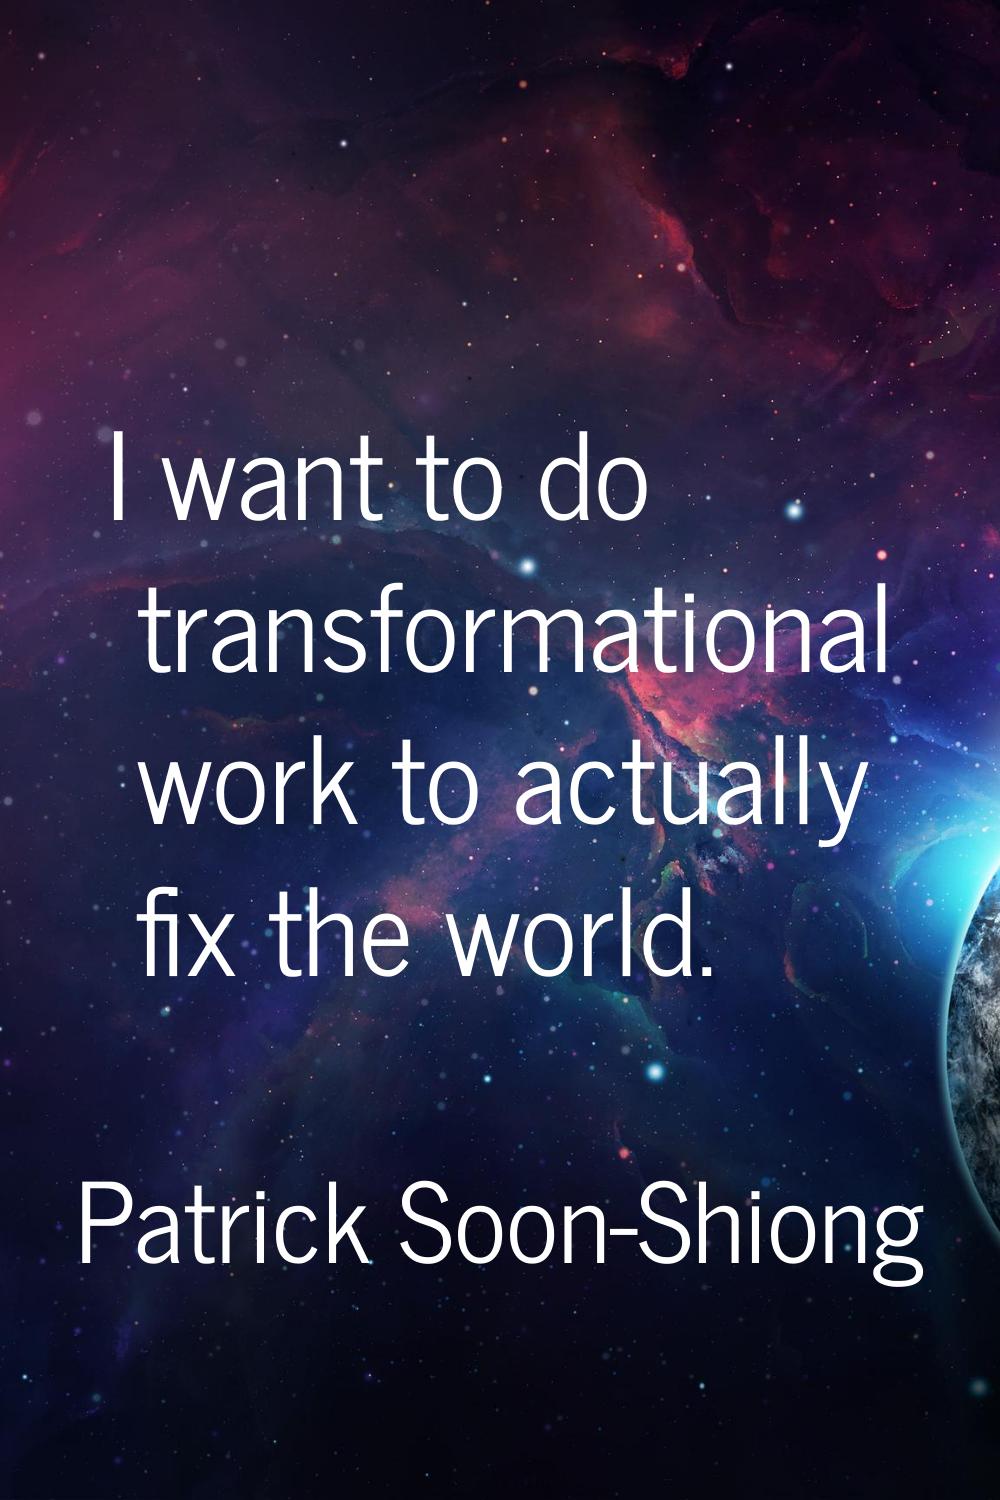 I want to do transformational work to actually fix the world.